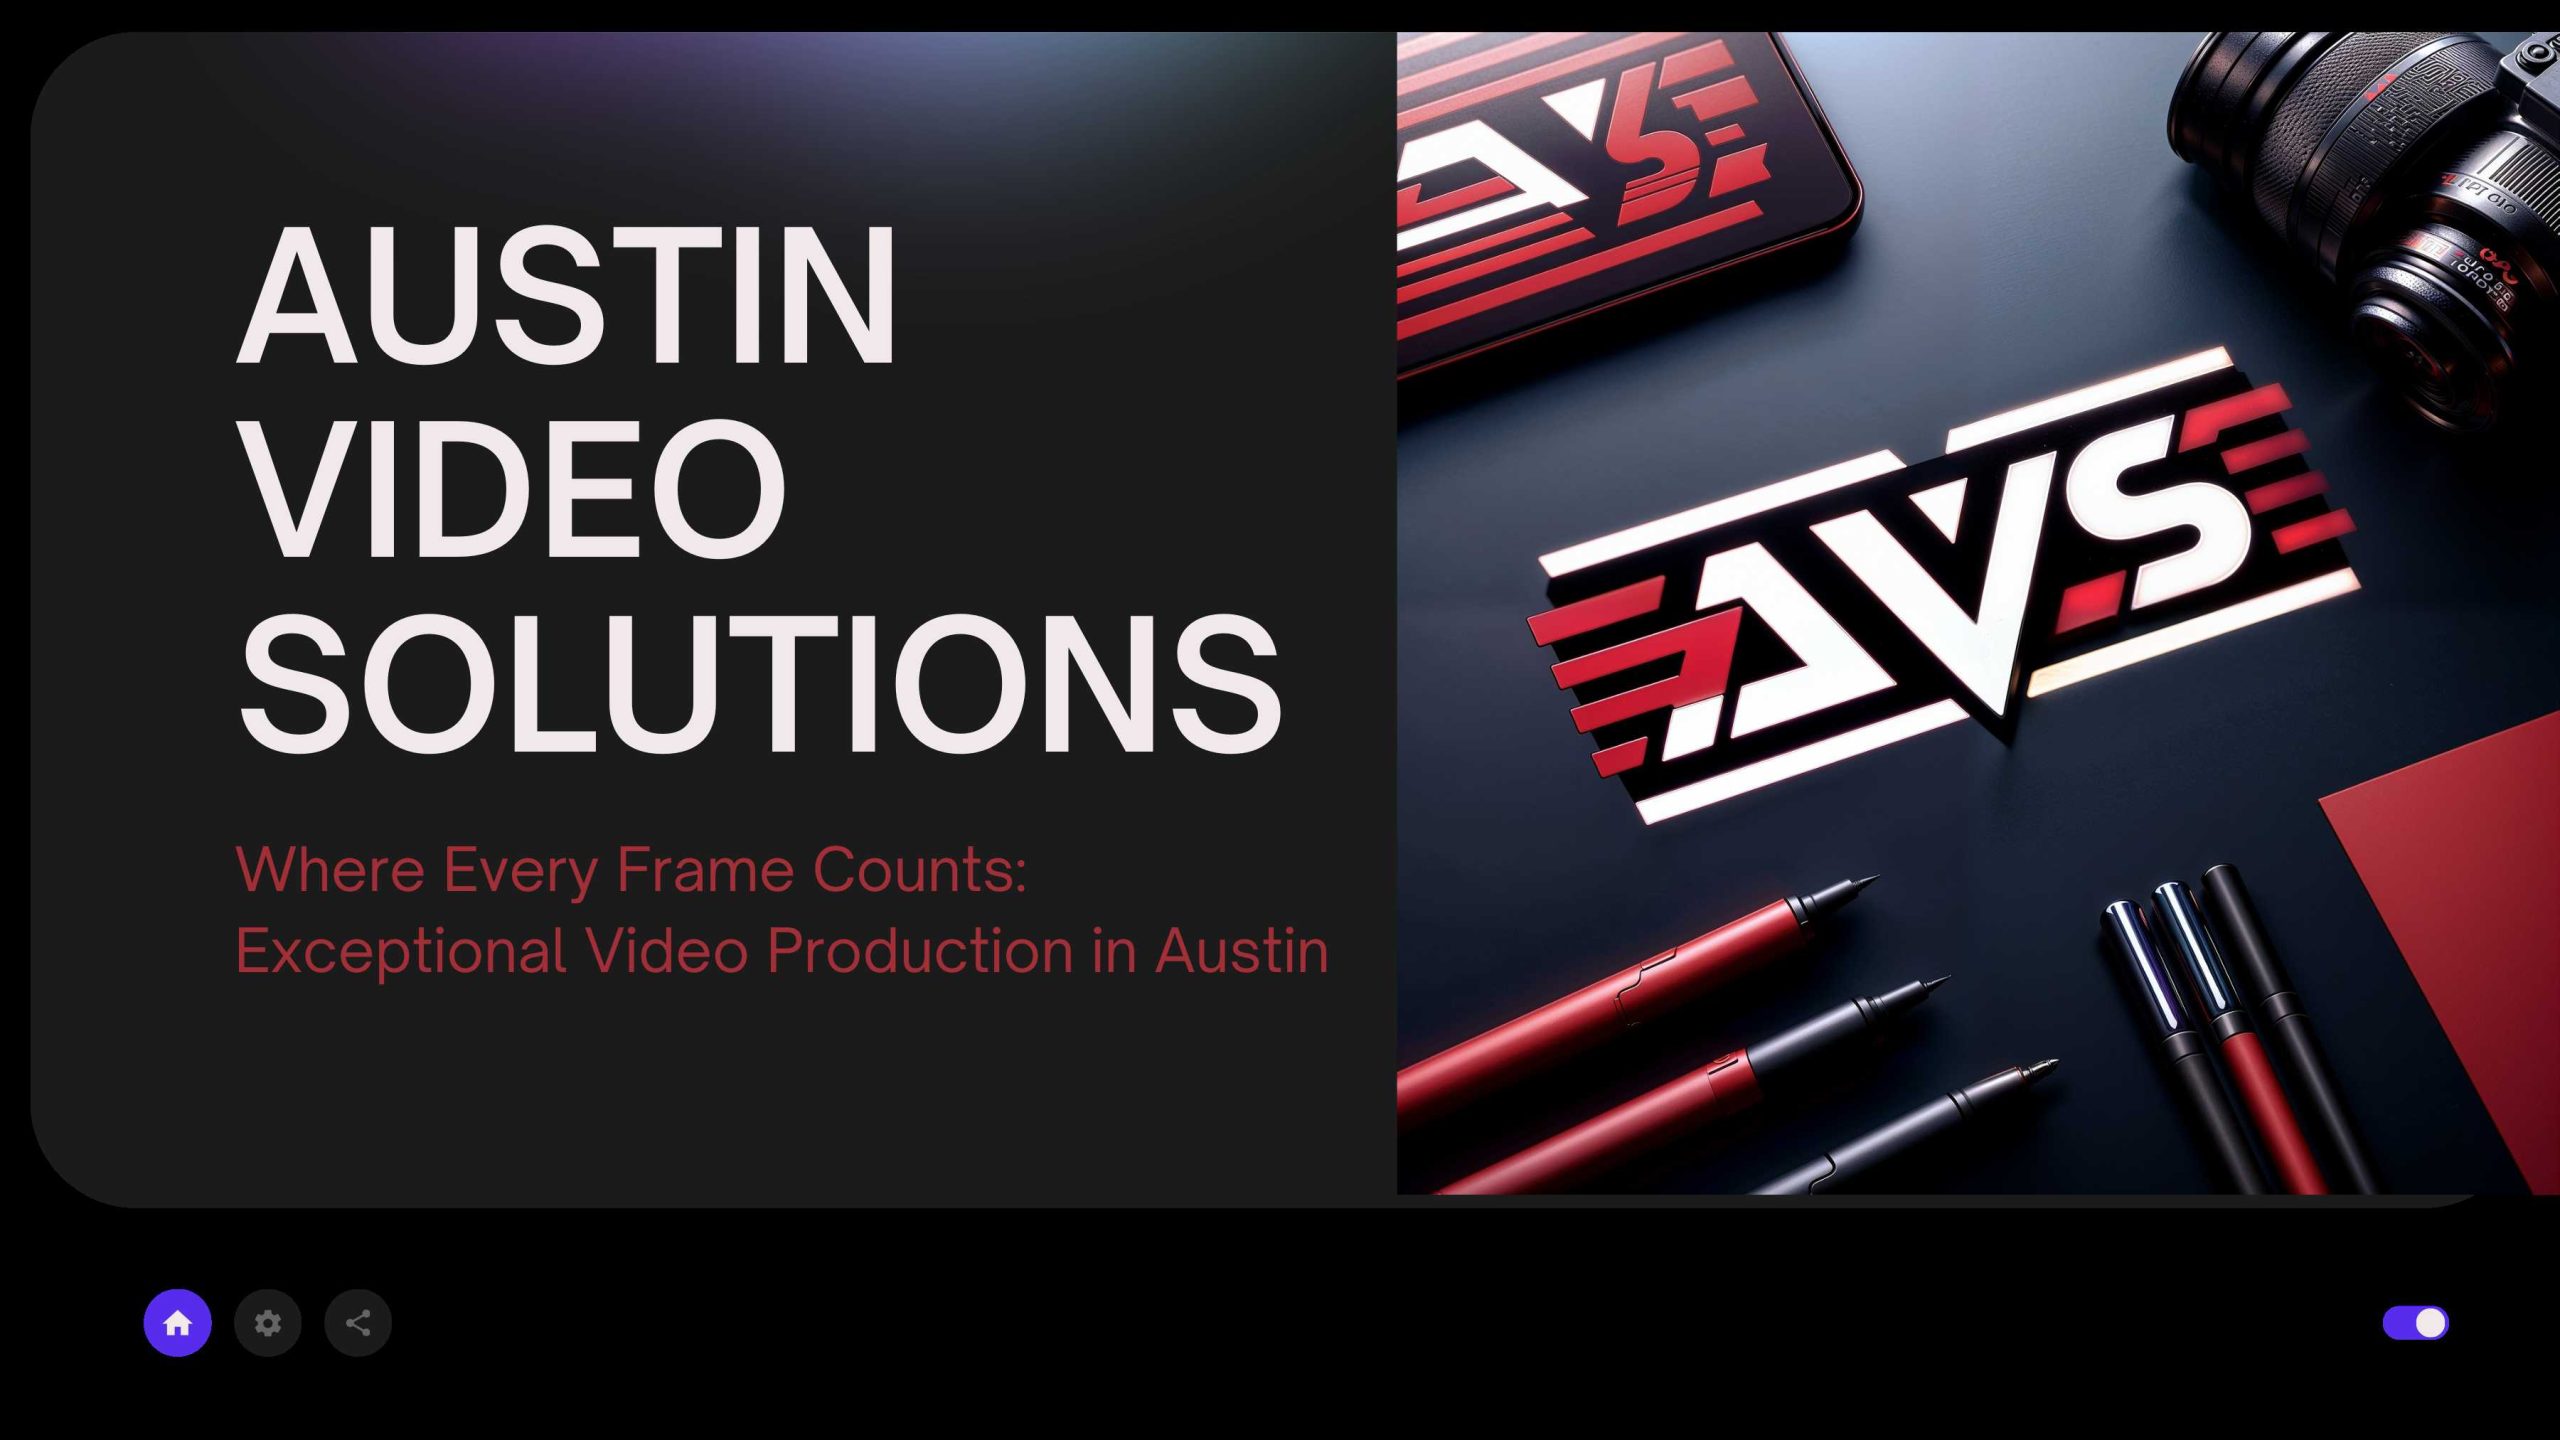 Austin Video Solutions Austin Video Solutions offers an effortless path to digitize your analog media. We convert everything from home movies to photos and films. Located in Austin, providing hands-on, local expertise for all your digitization needs.